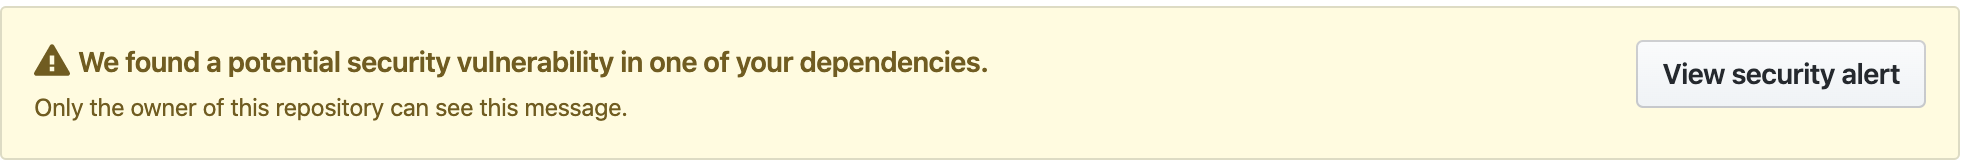 A security alert from Github.com